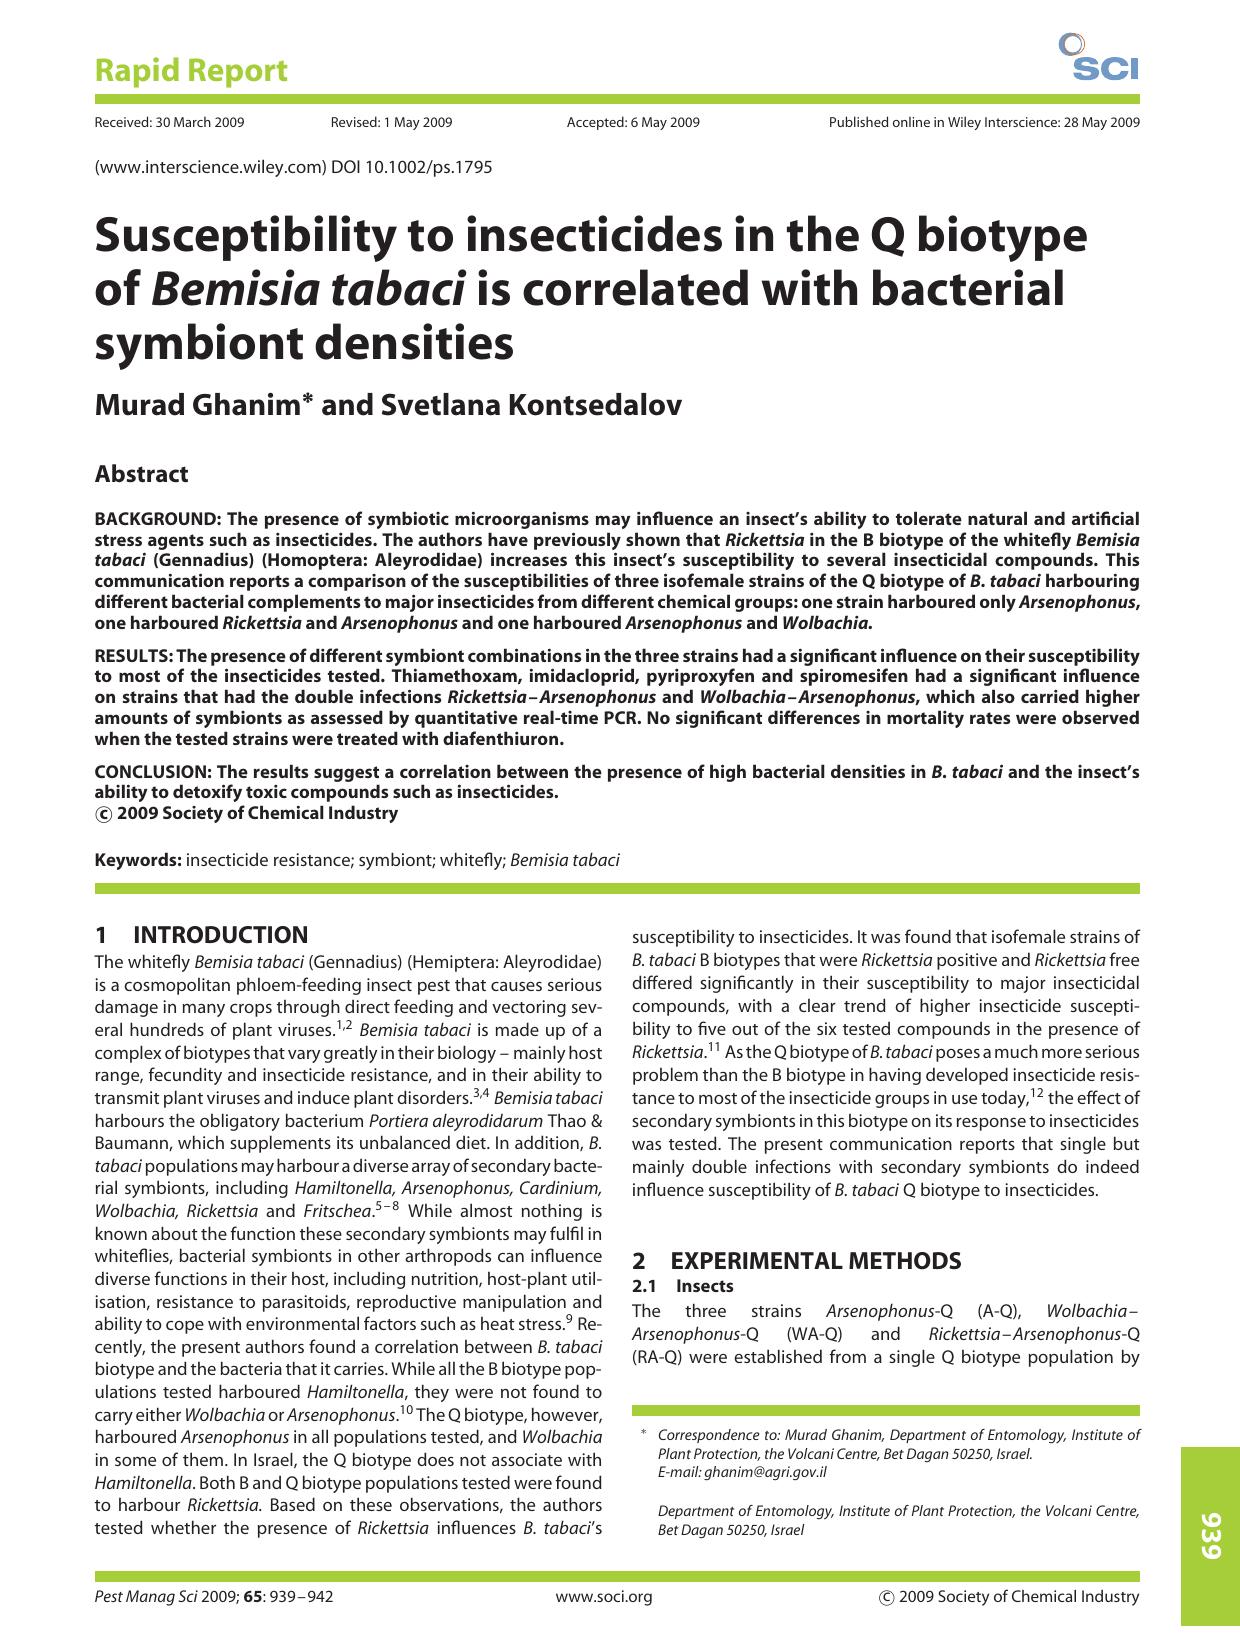 Susceptibility to insecticides in the Q biotype of Bemisia tabaci is correlated with bacterial symbiont densities by Unknown